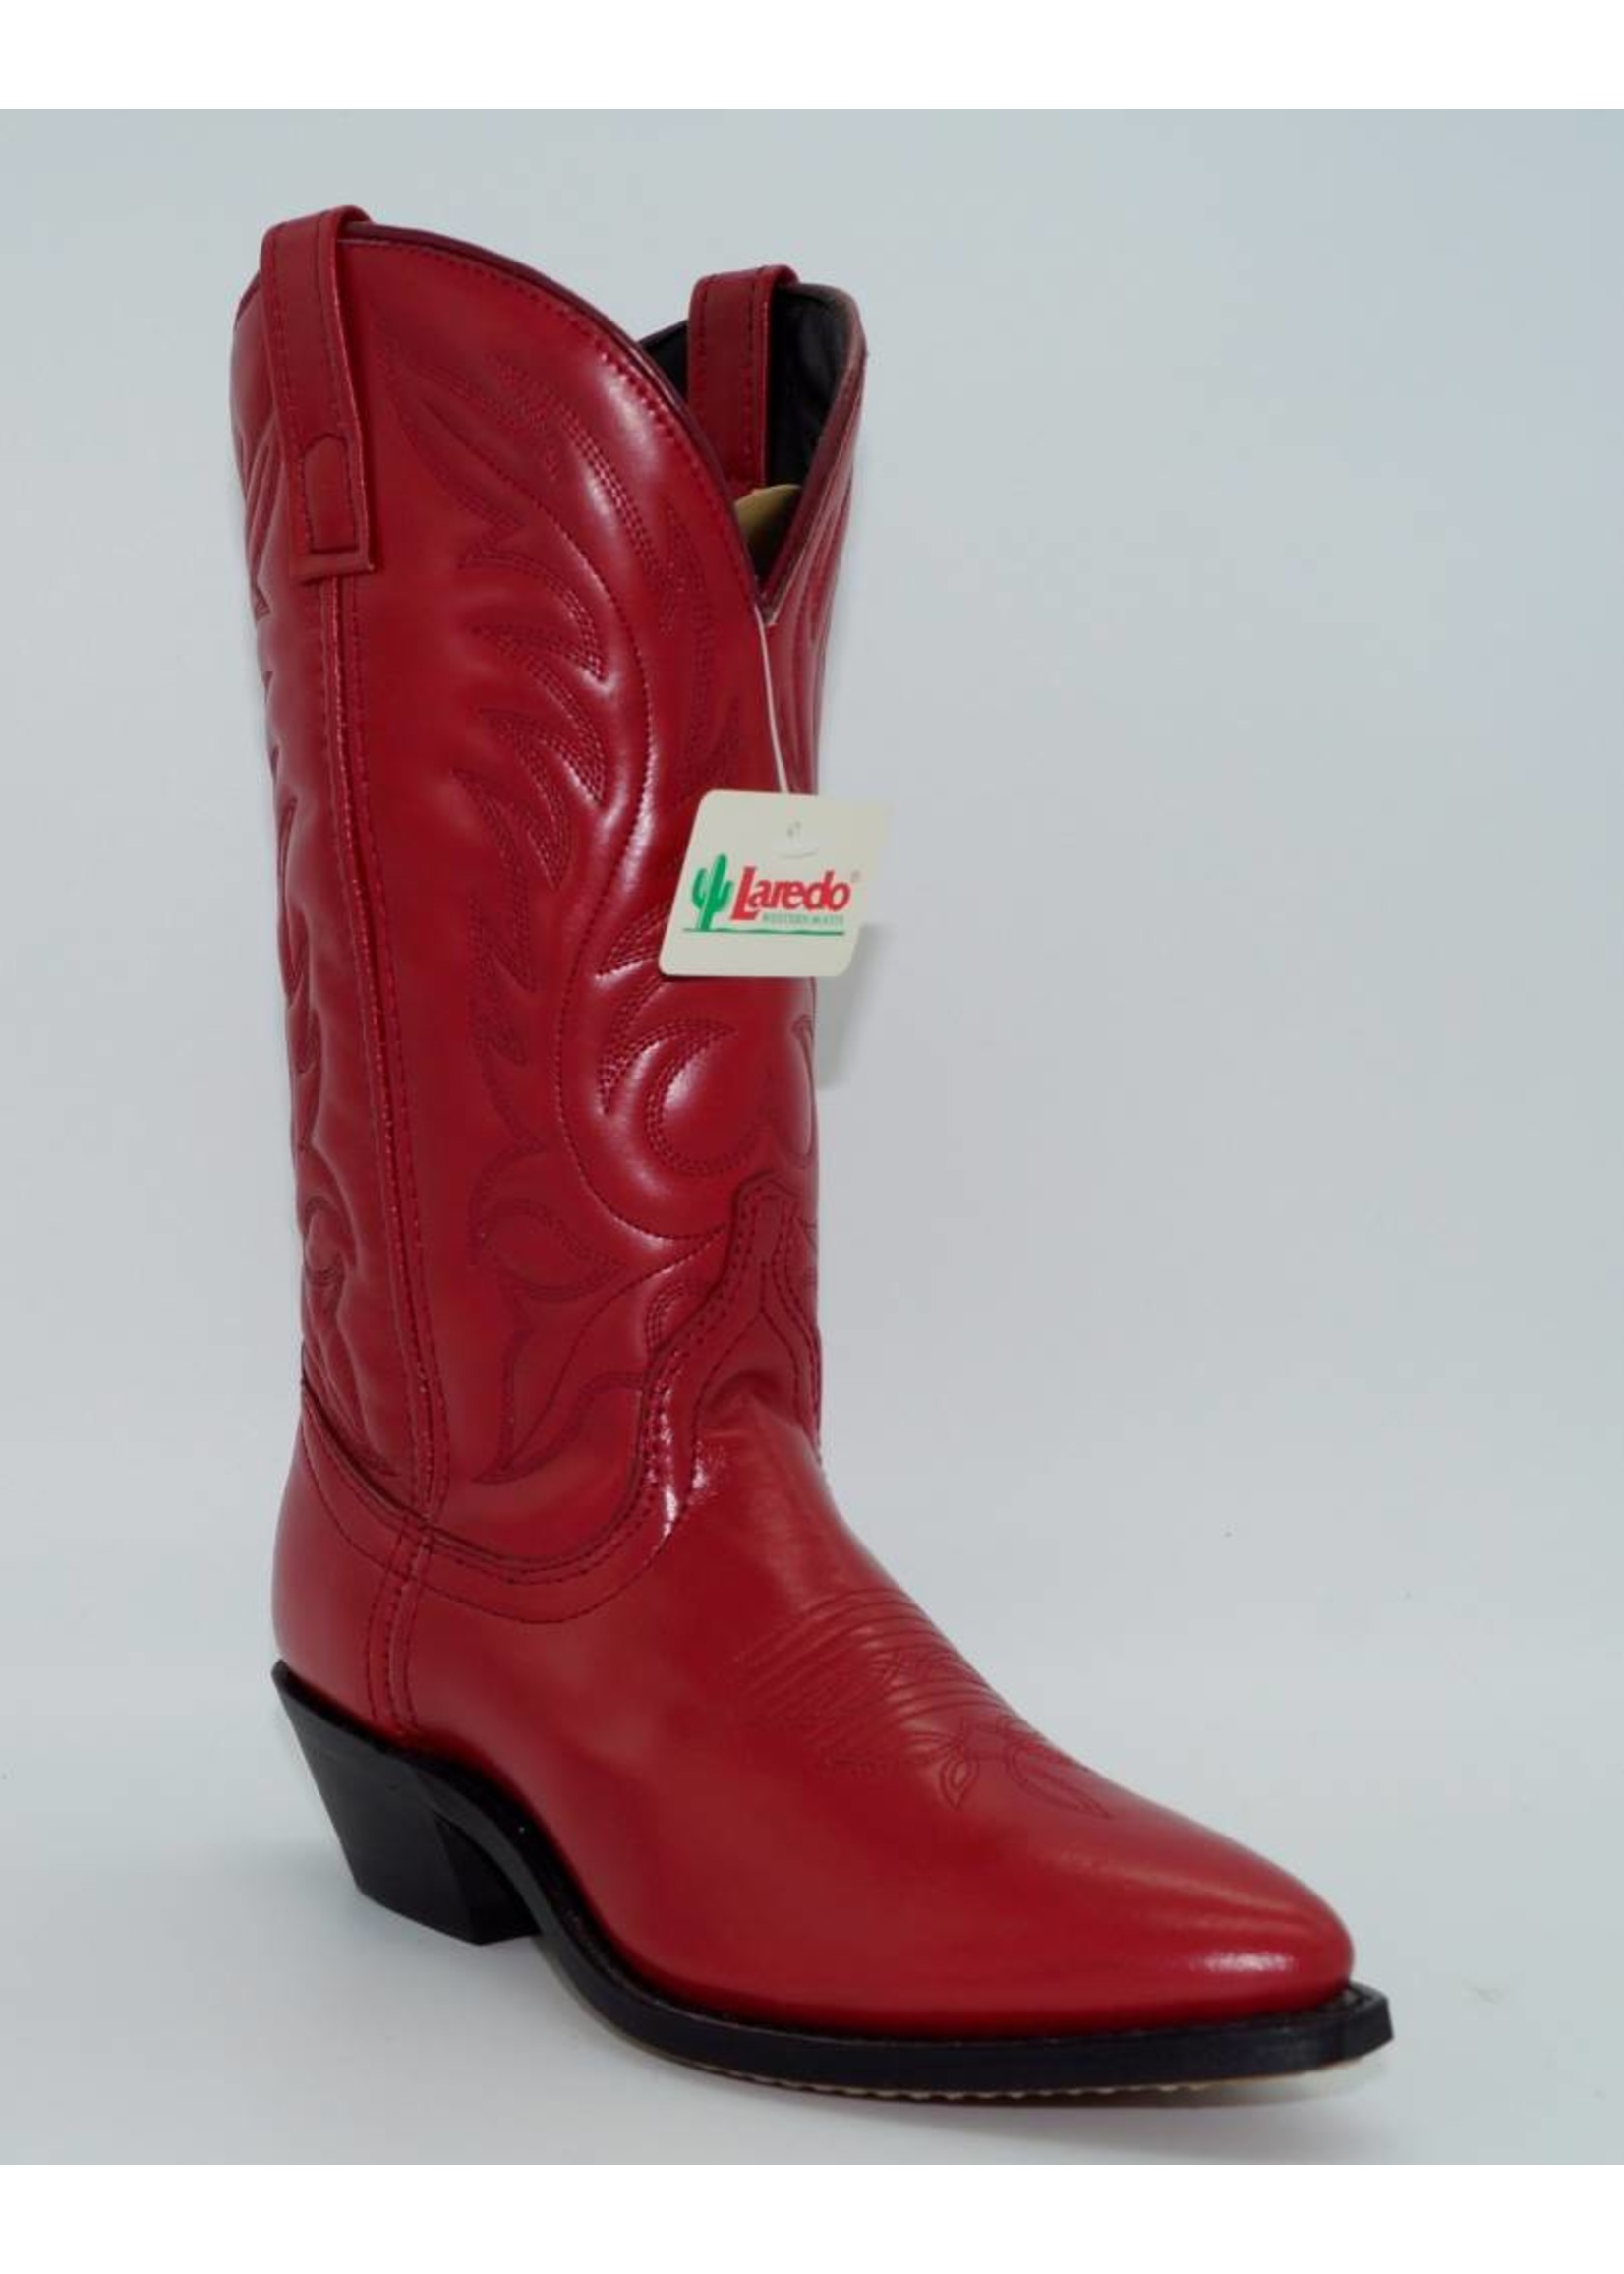 Laredo Women's Red Leather Western Boots 5741